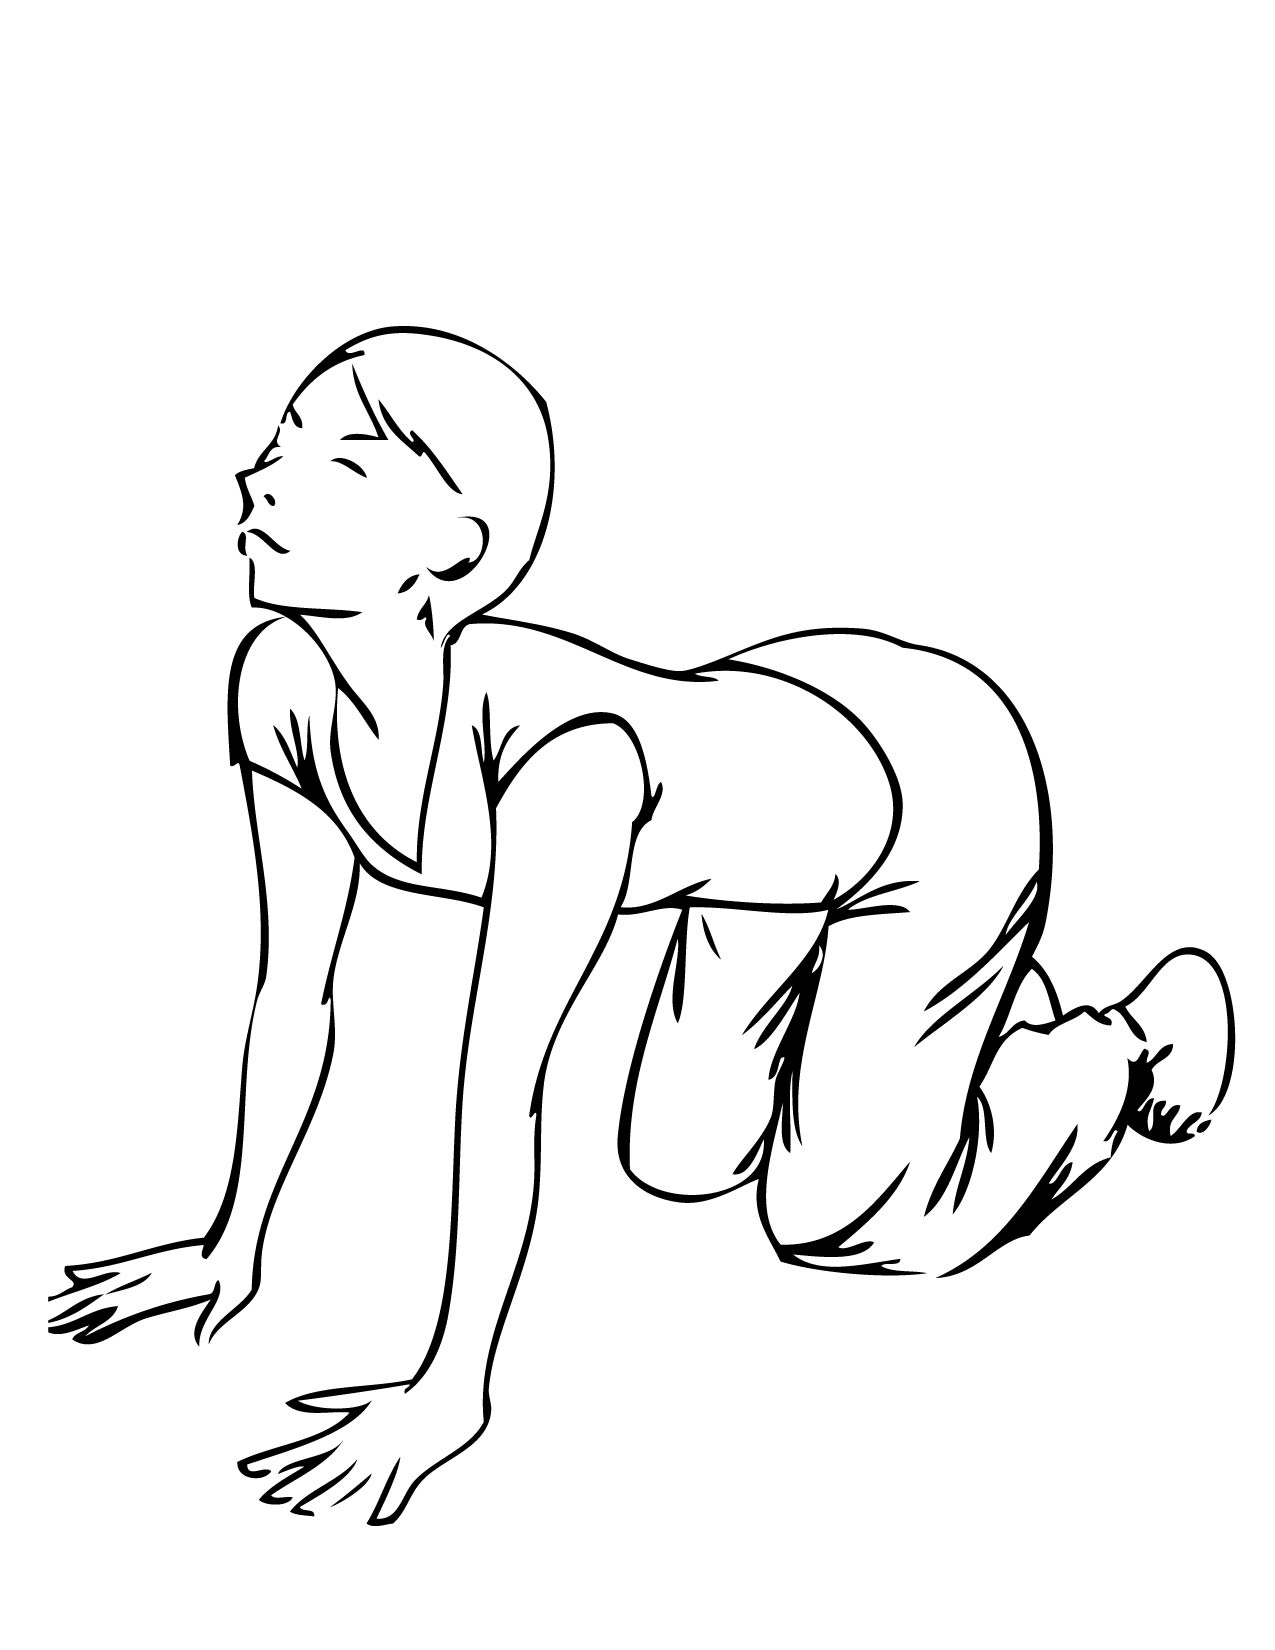 Cow Pose Coloring Page - Handipoints